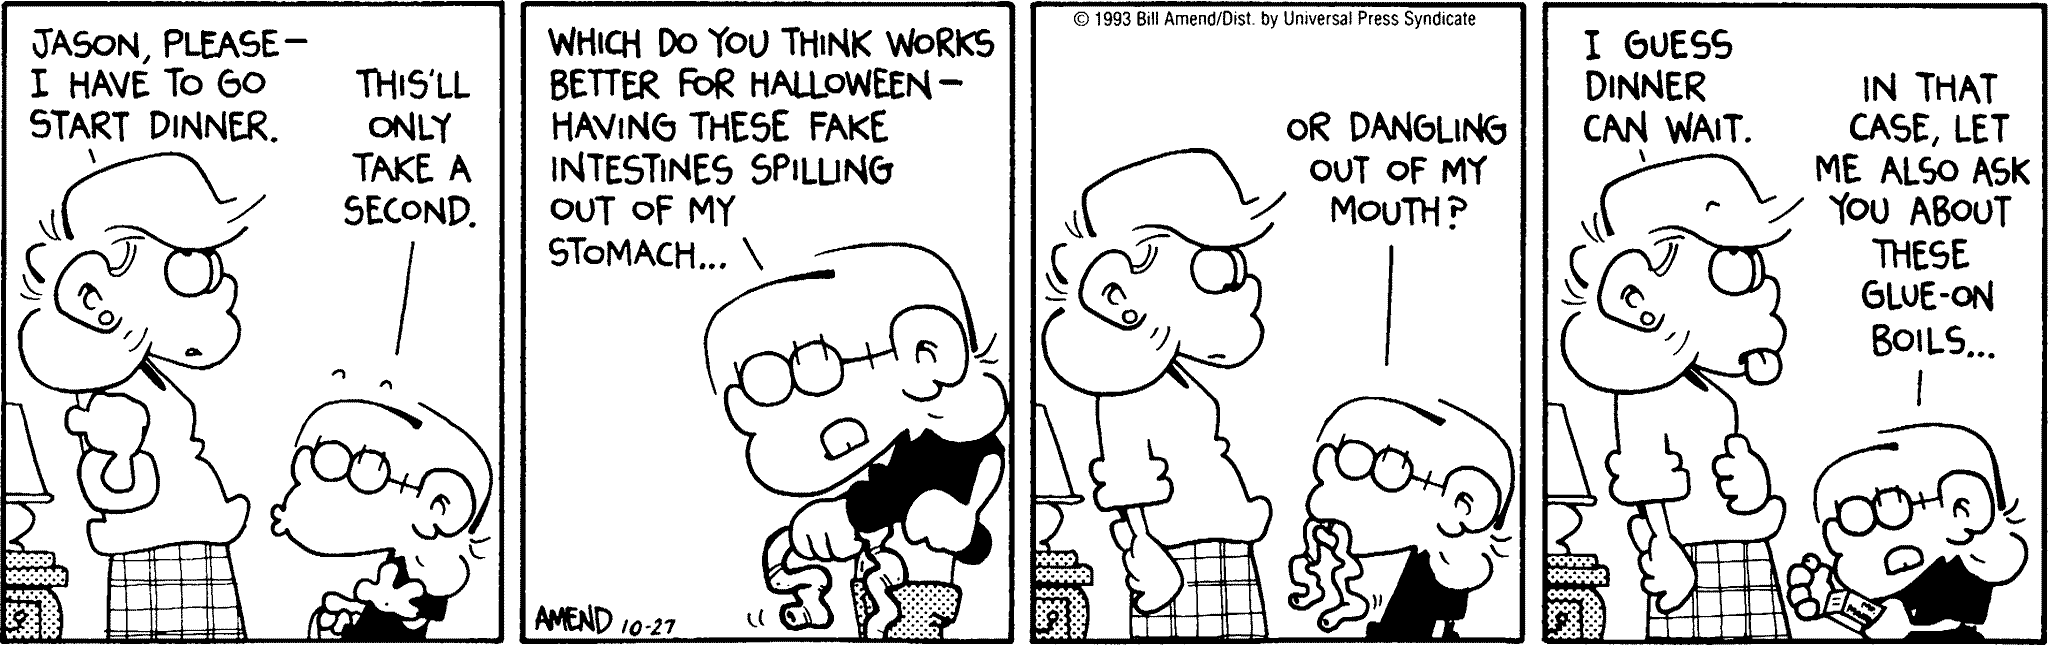 Halloween Comics - FoxTrot comic strip by Bill Amend - Published October 27, 1993 - Andy Fox: Jason, please- I have to go start dinner. Jason: This'll only take a second. Which do you think works better for Halloween- having these fake intestines spilling out of my stomach... or dangling out of my mouth? Andy: I guess dinner can wait. Jason: In that case. let me also ask you about these glue-on boils...